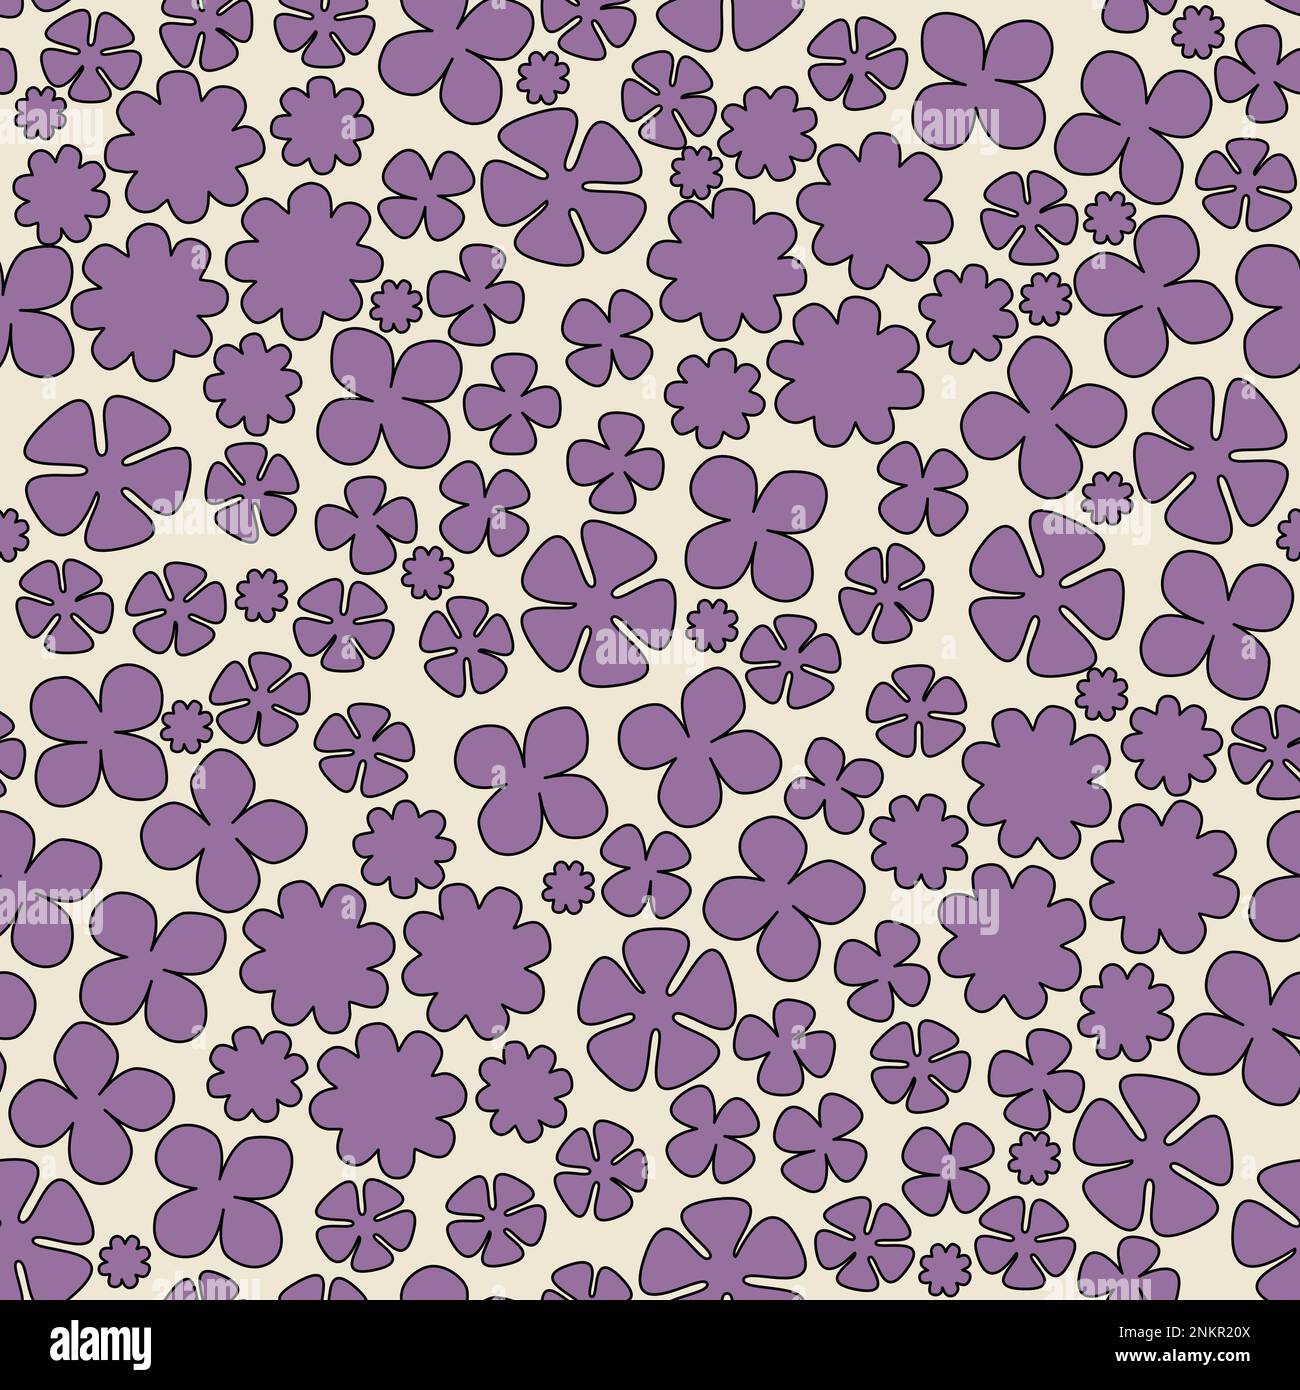 Trendy floral seamless pattern with cute purple flowers. Abstract shape flowers on white background Stock Photo